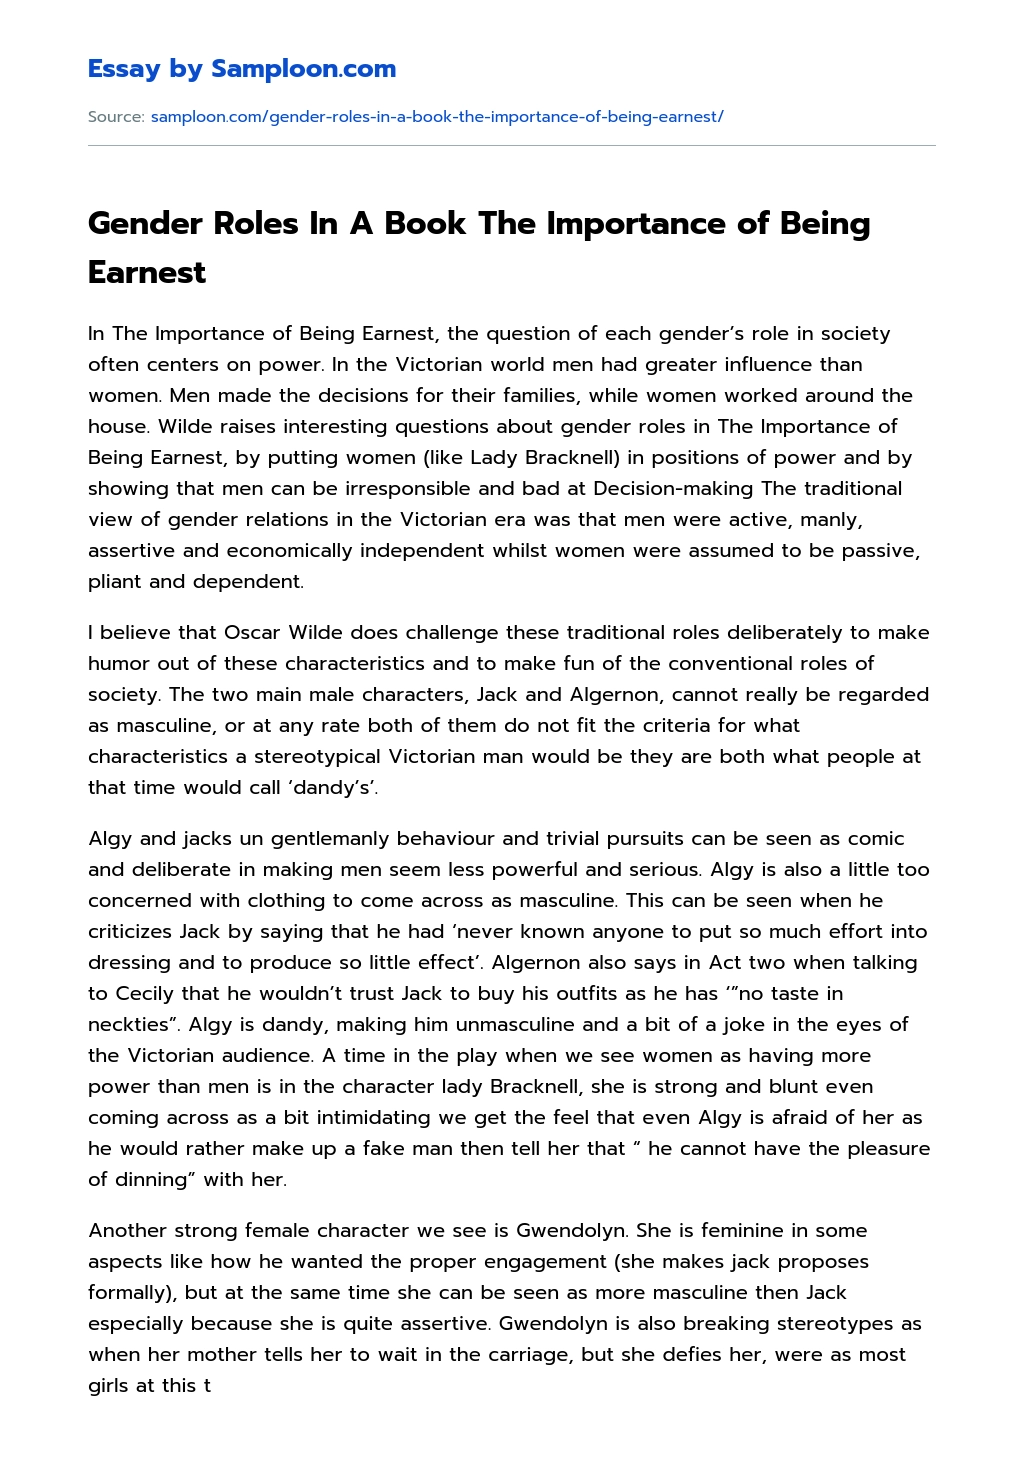 Gender Roles In A Book The Importance of Being Earnest essay